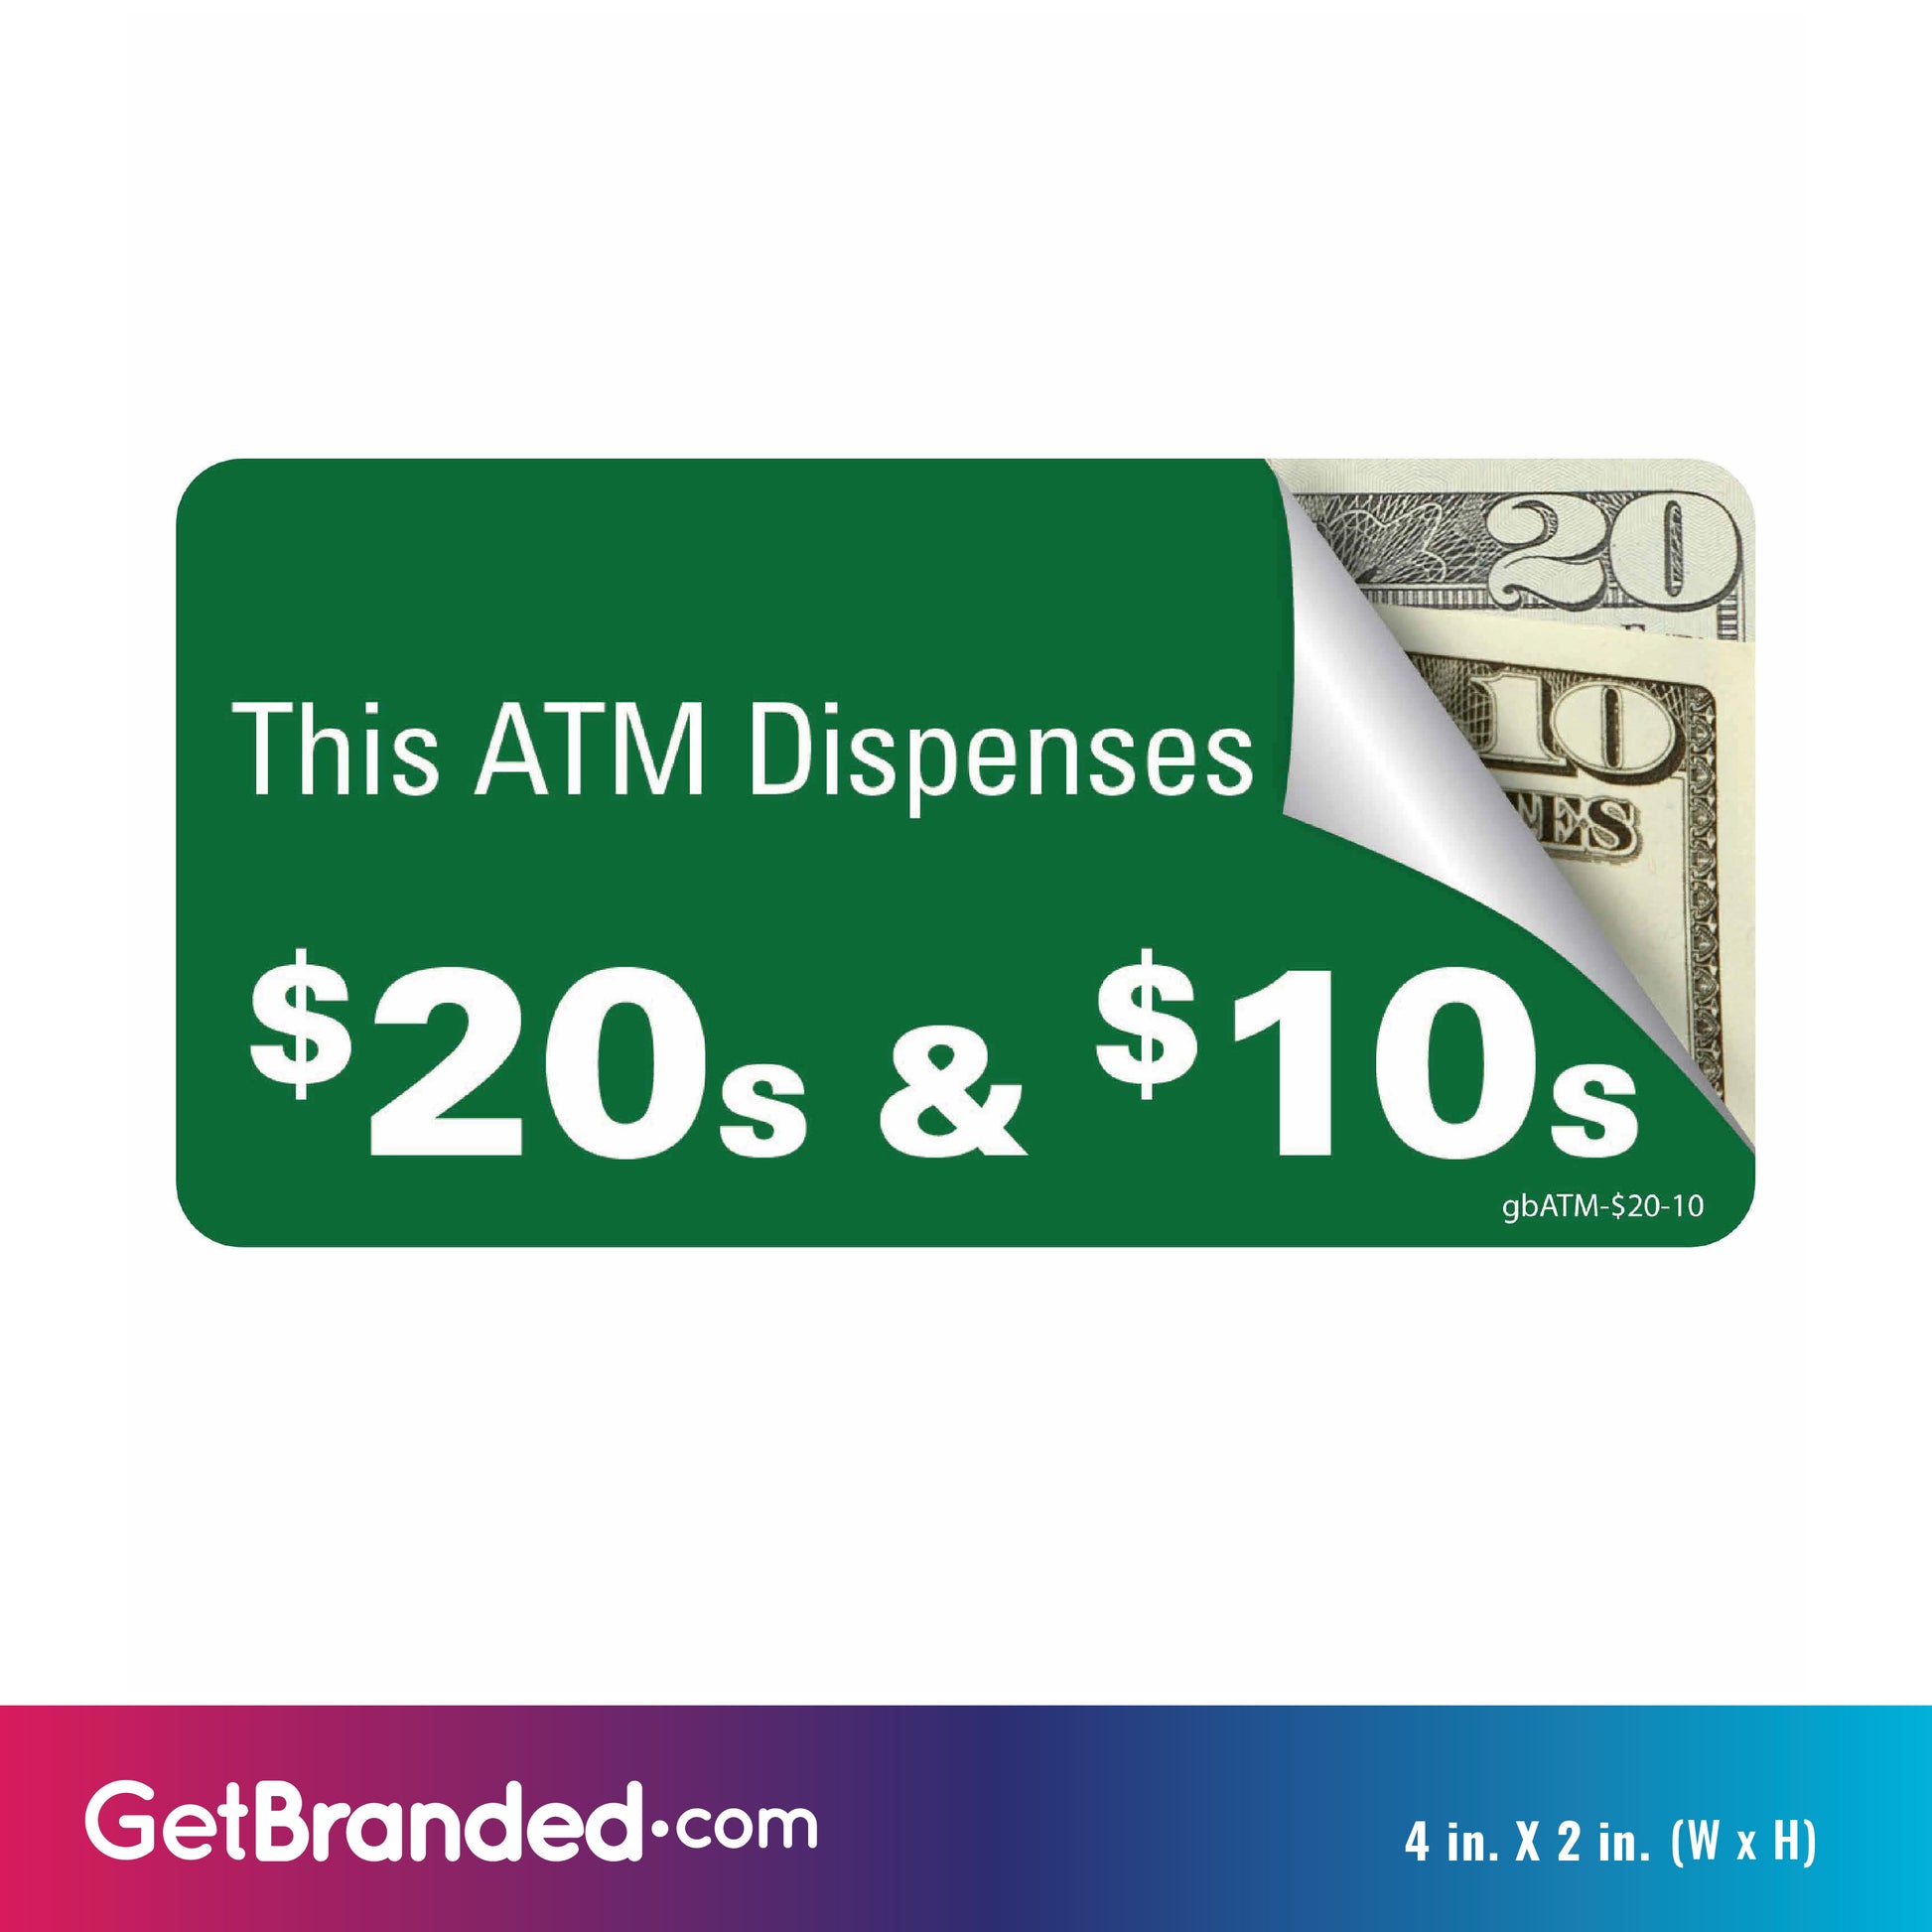 Pro ATM Dispense $20's & $10's Decal size guide. 4 inches by 2 inches in size.